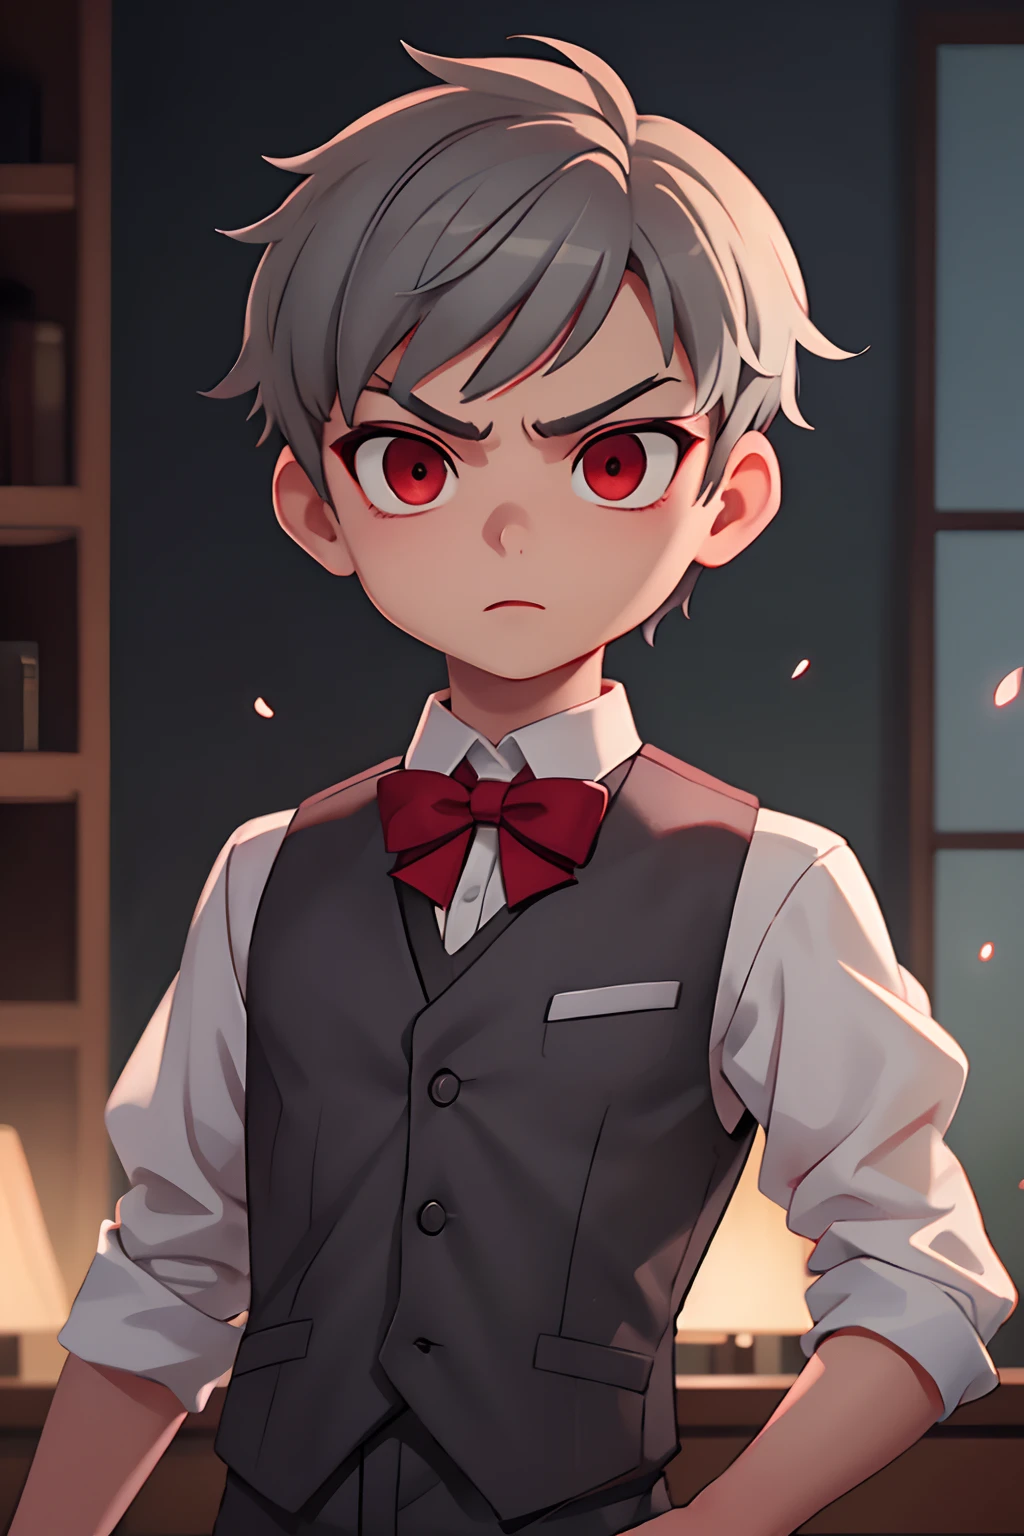 masterpiece,  1boy,  young,  handsome,  ash grey short hair,  perfect face,  detailed eyes and face,  red eyes, serious expression, vest,  clean shaved,  capturing an elegant atmosphere,  dynamic lighting